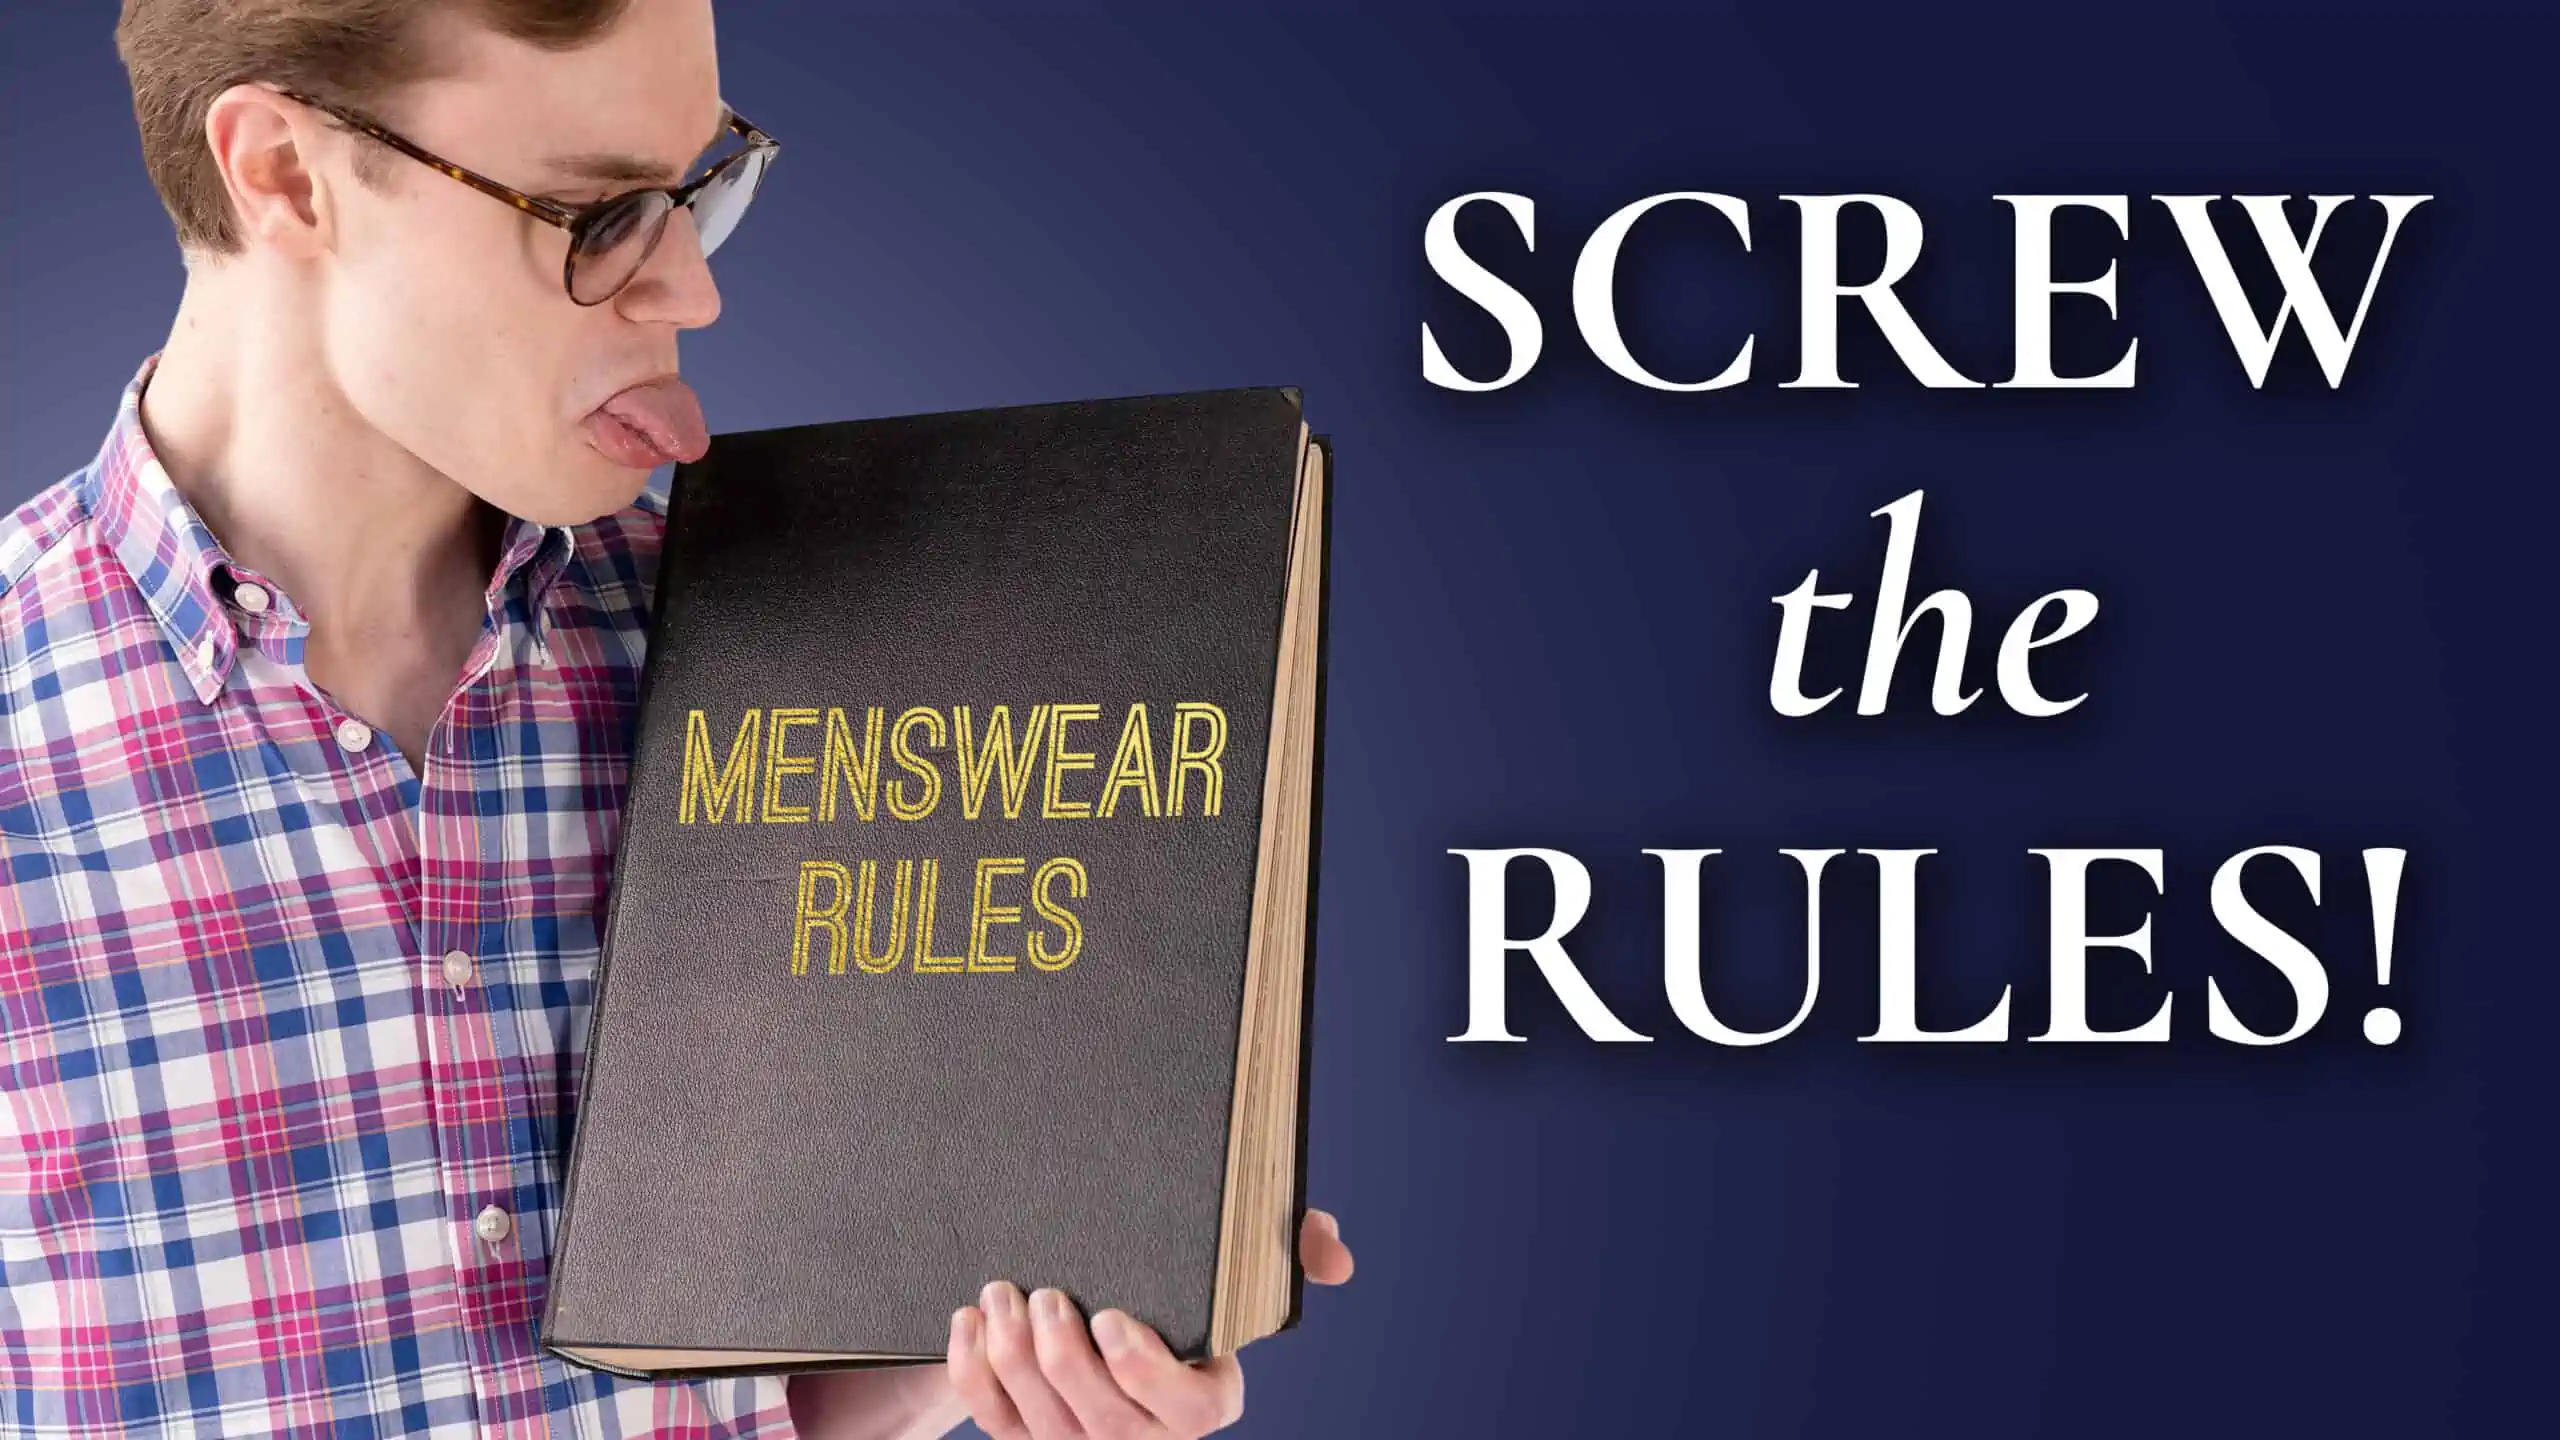 screw the rules 3840x2160 scaled